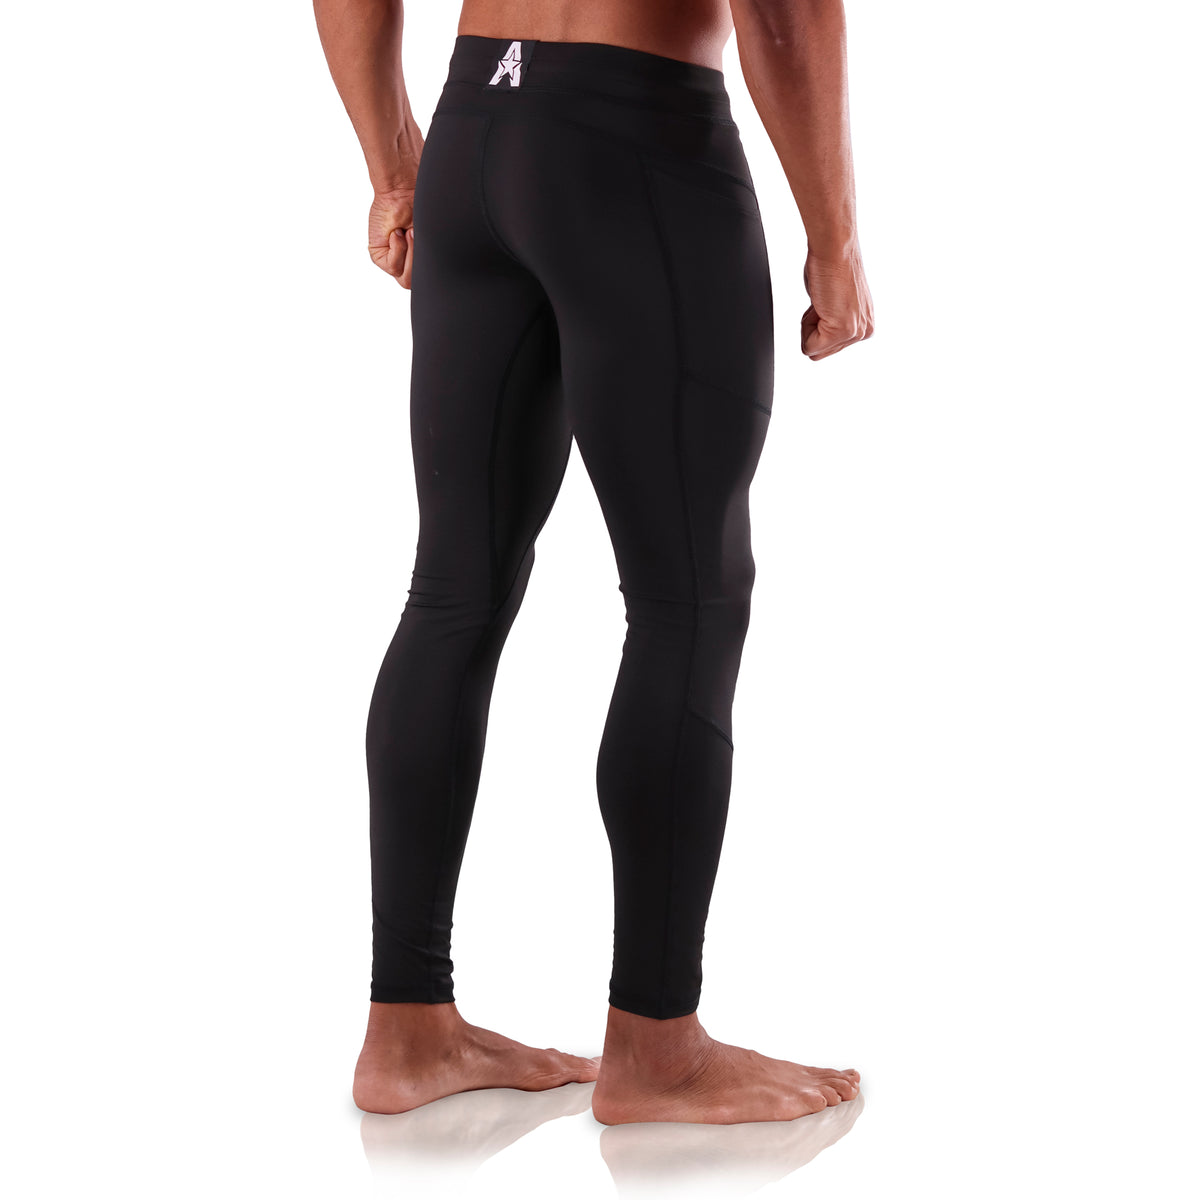 Up To 73% Off on Men's Compression Pants, Athl